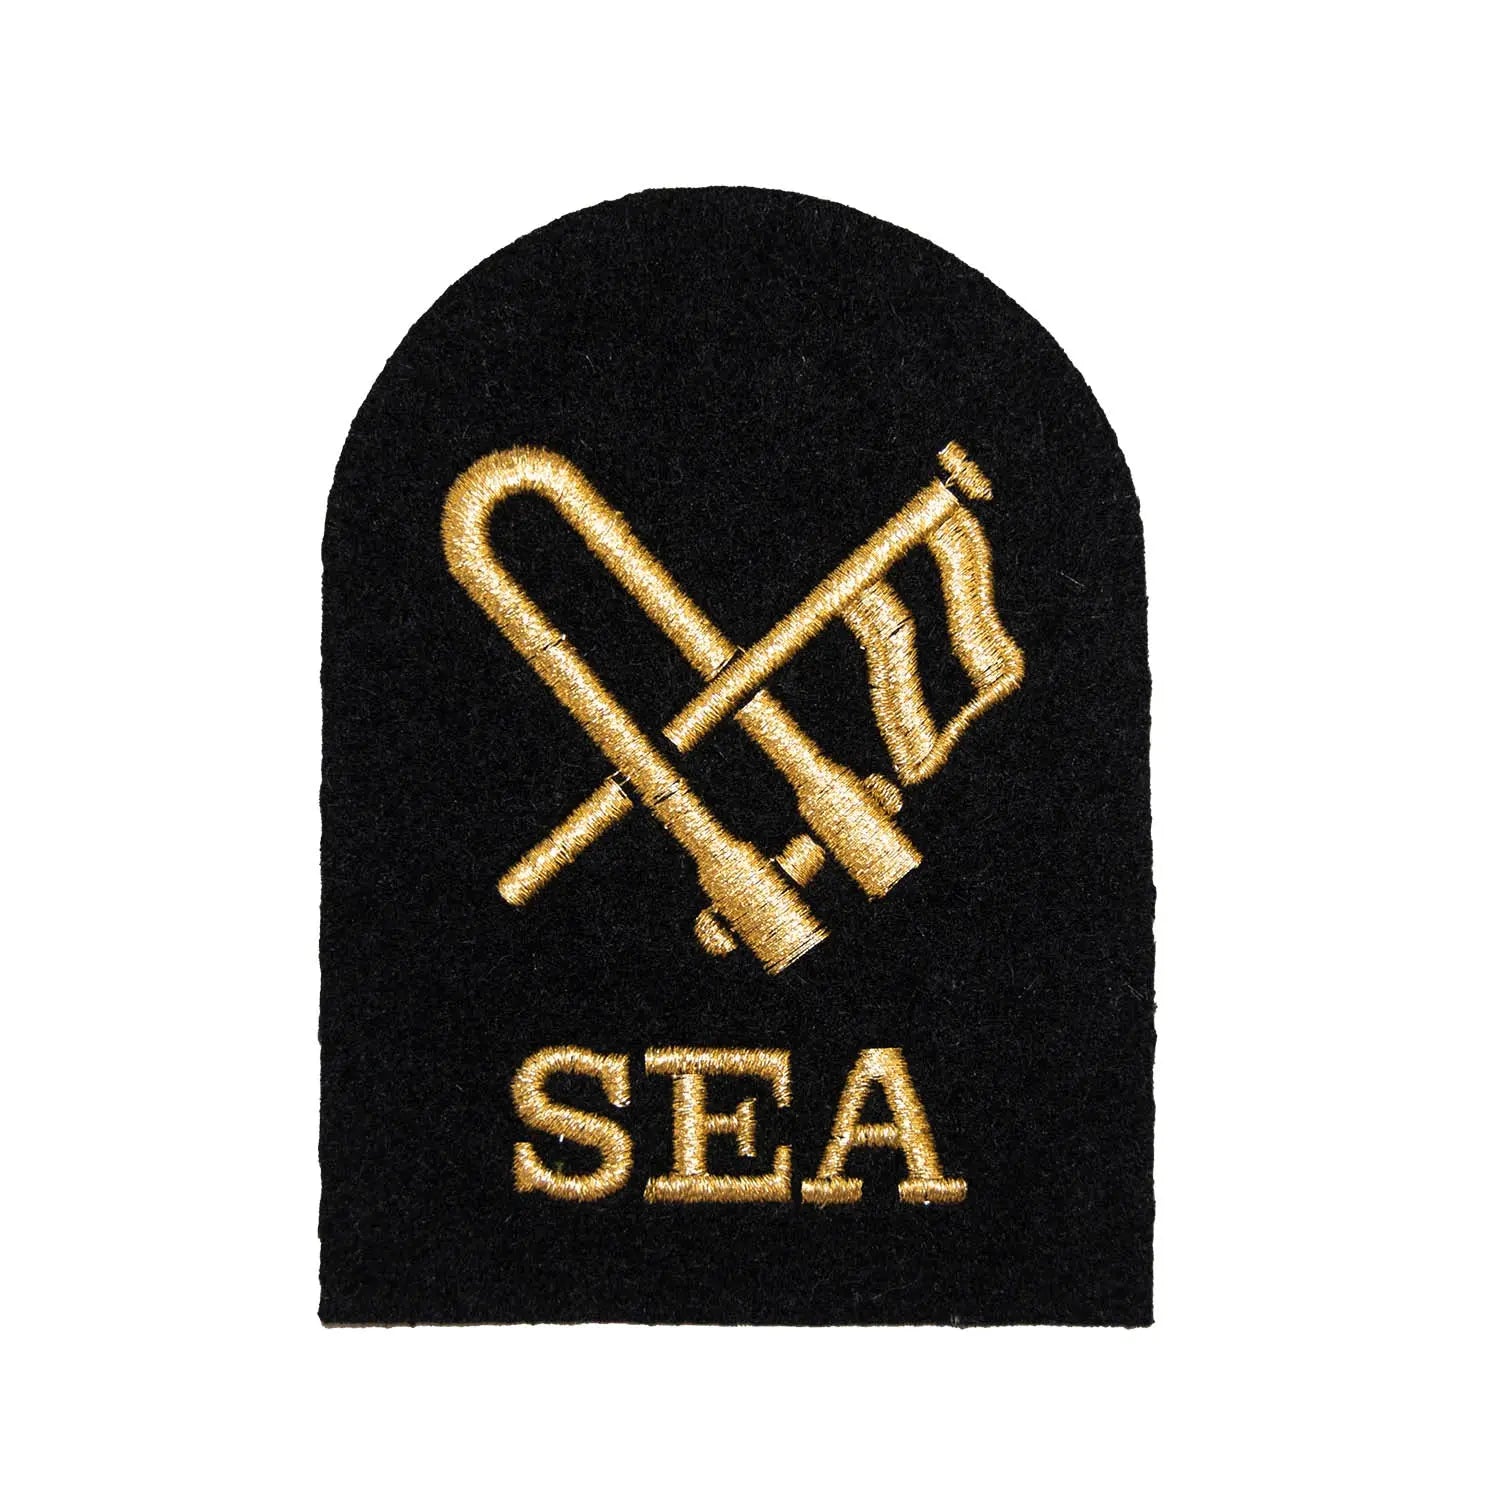 Seaman Specialist Basic Rate Royal Navy Qualification Badges wyedean